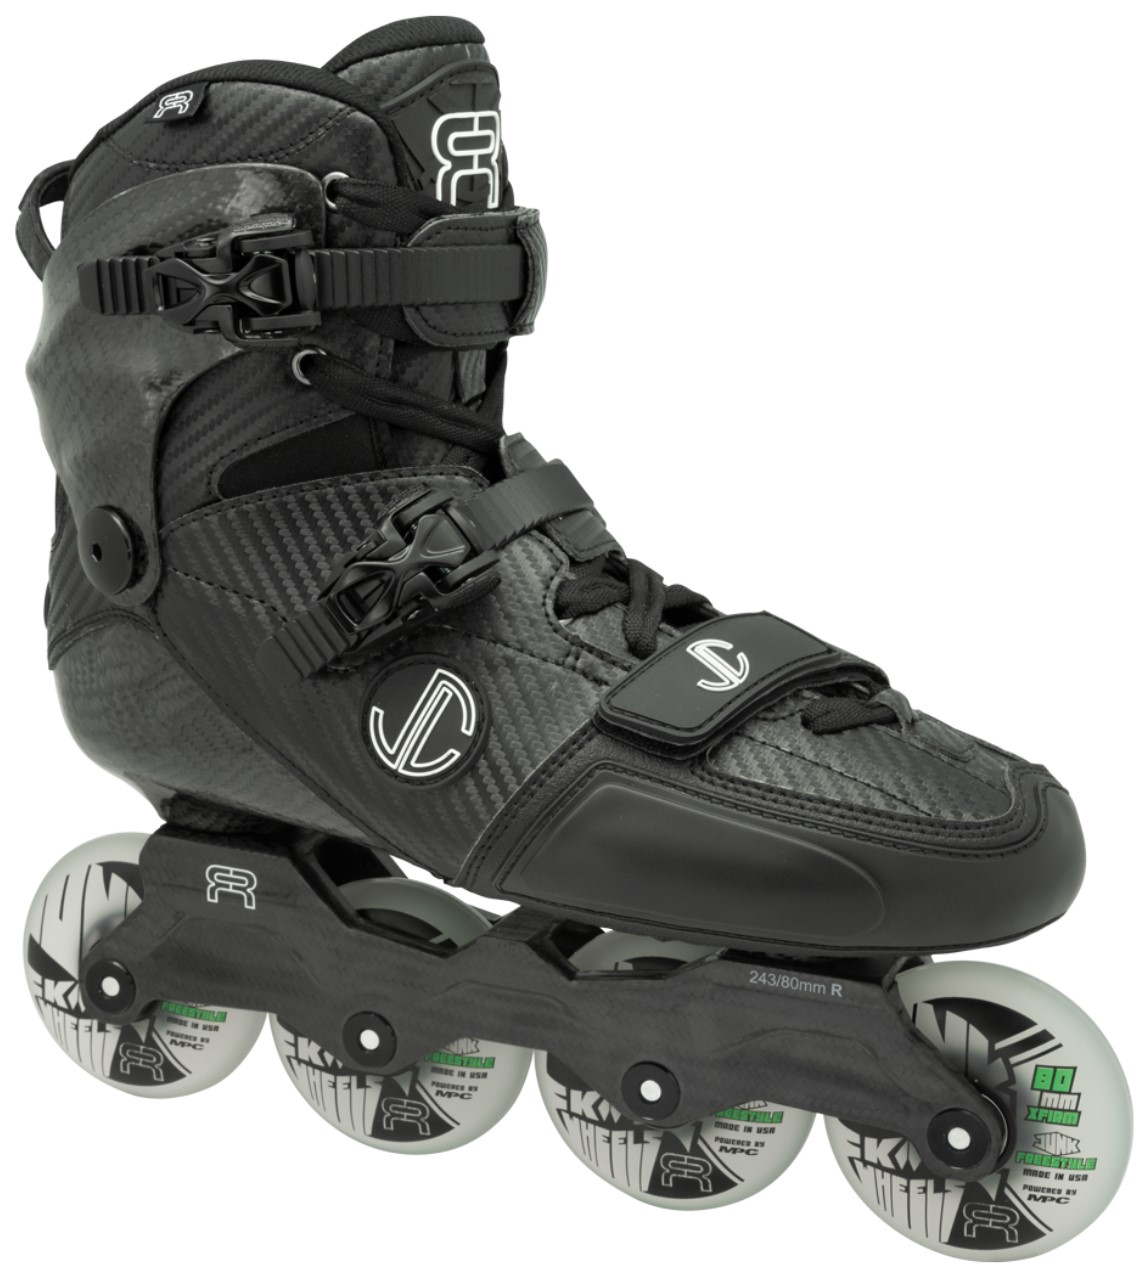 FR SL CARBON FREESTYLE inline skate for slalom with carbon shell, carbon cuff and rockered carbon frame